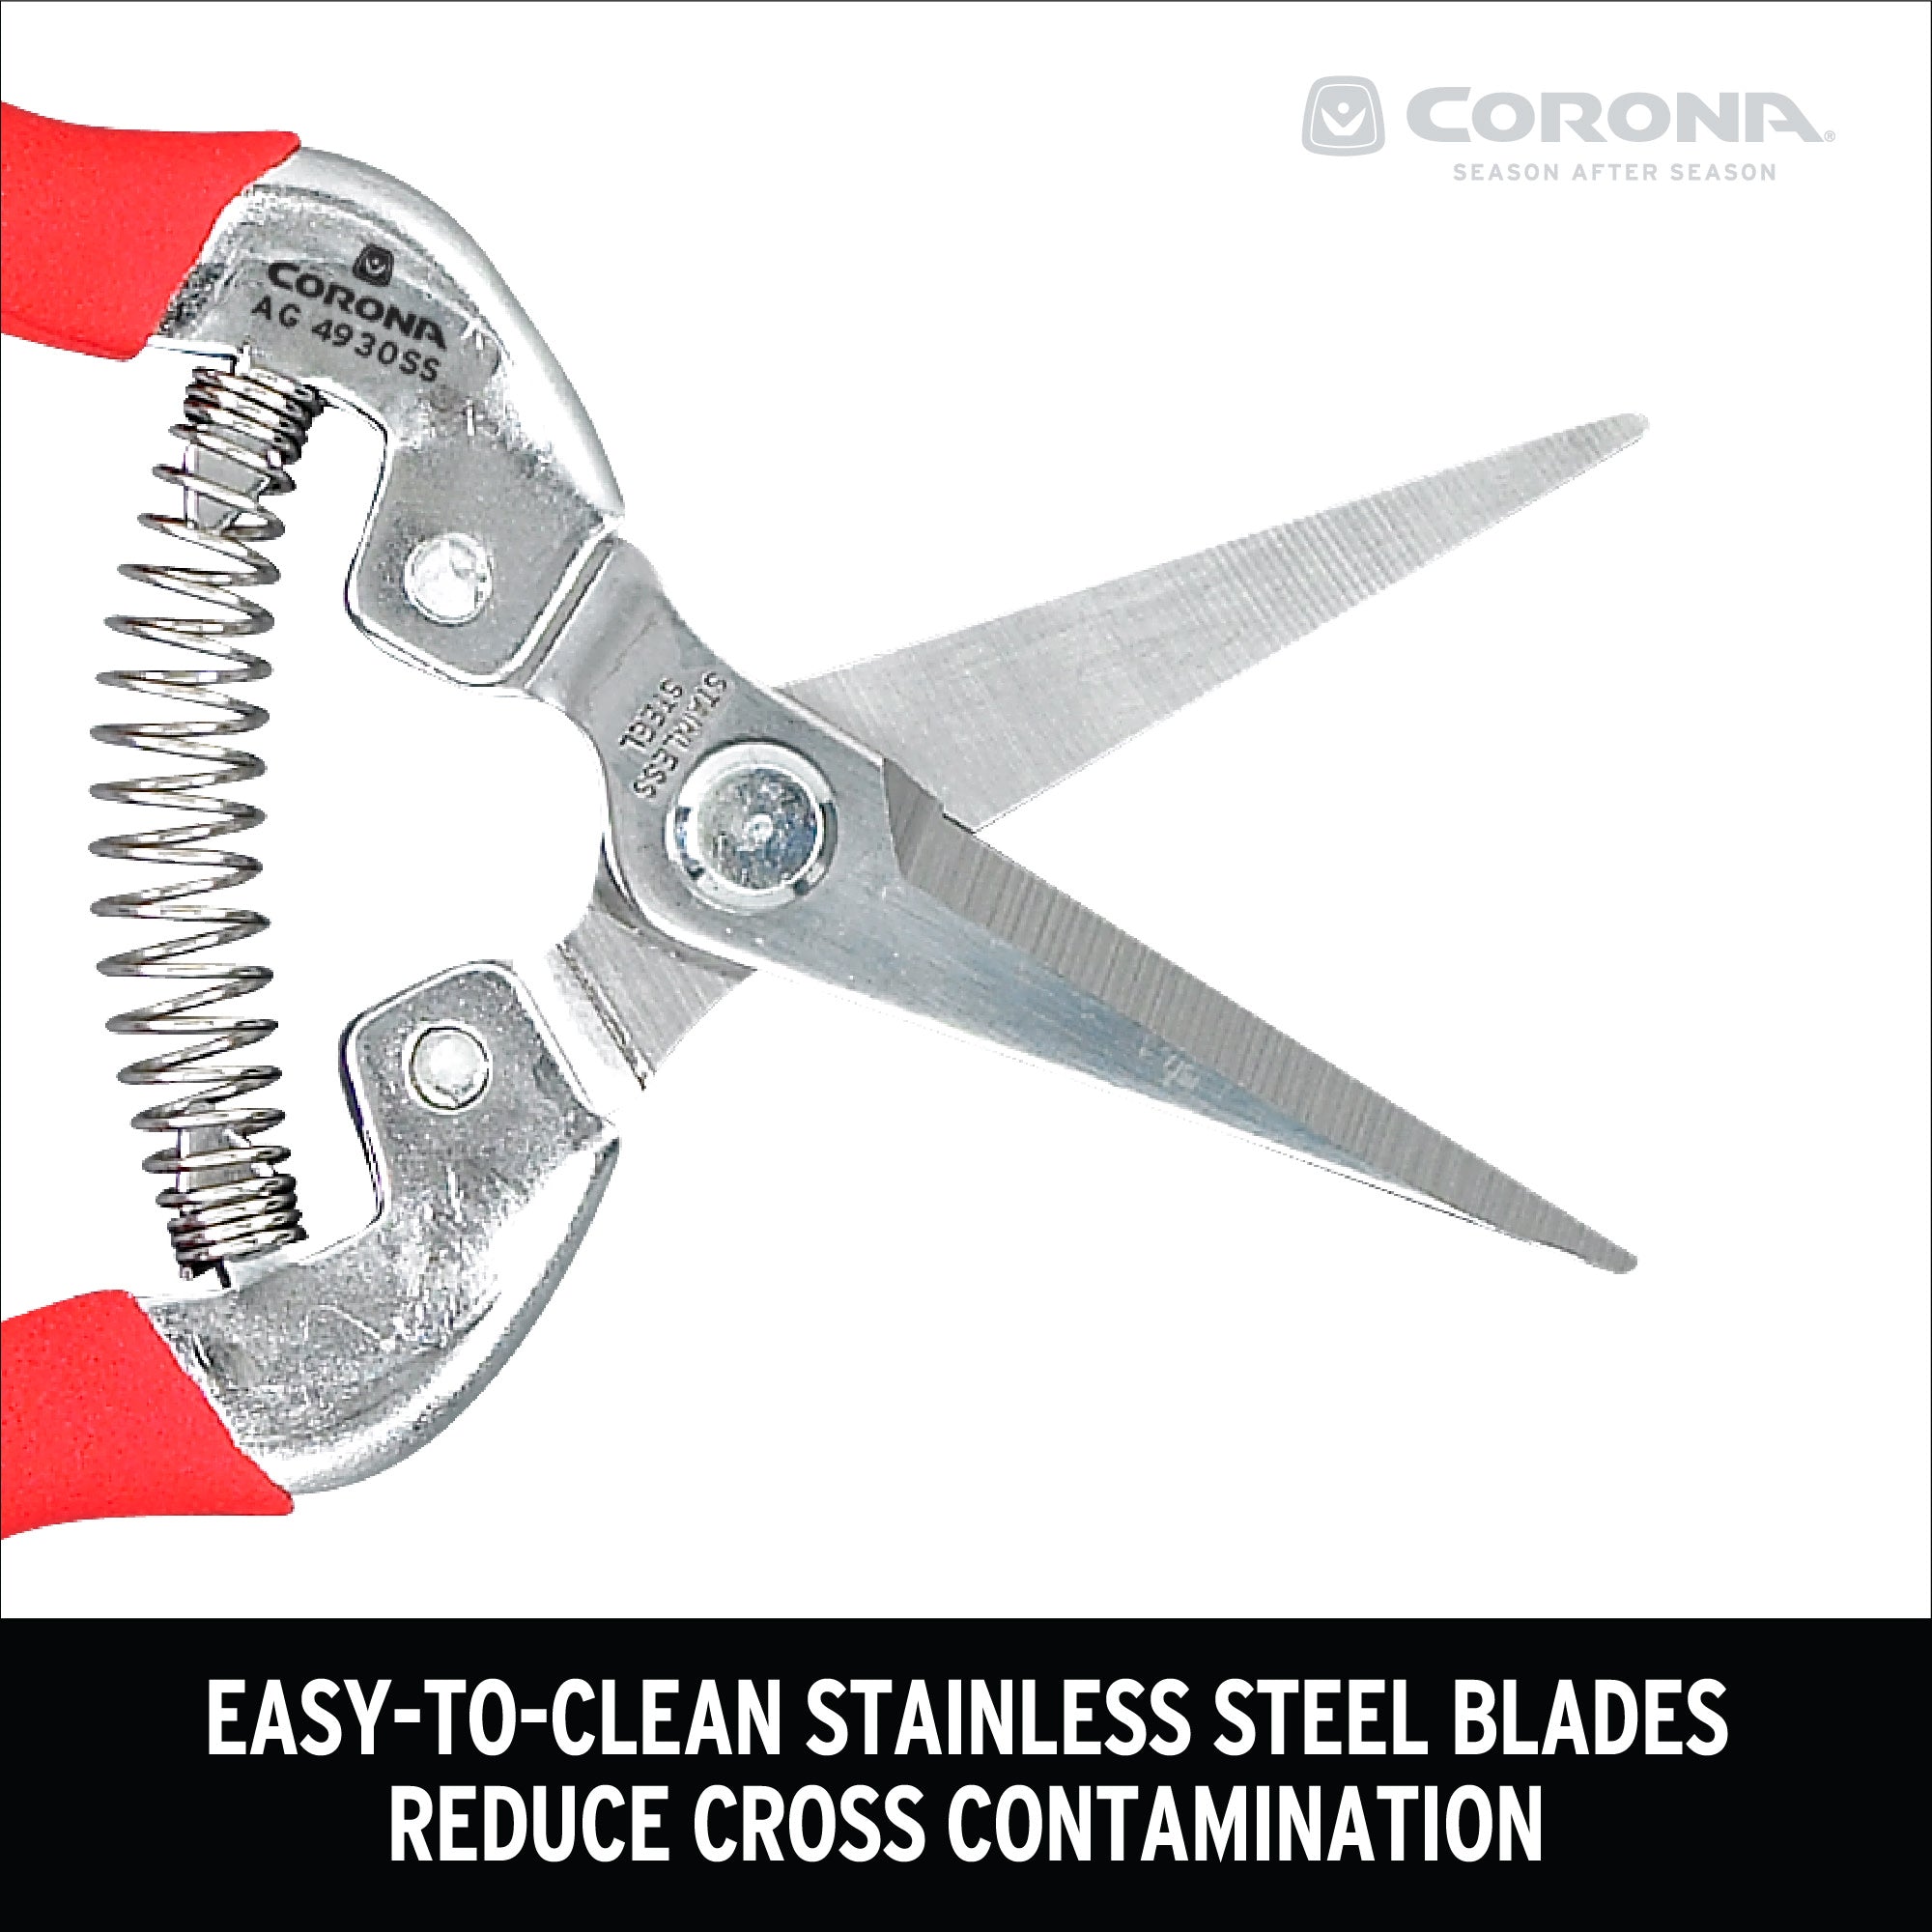 Long Straight Snips, 1-3/4 in. Stainless Steel Blades